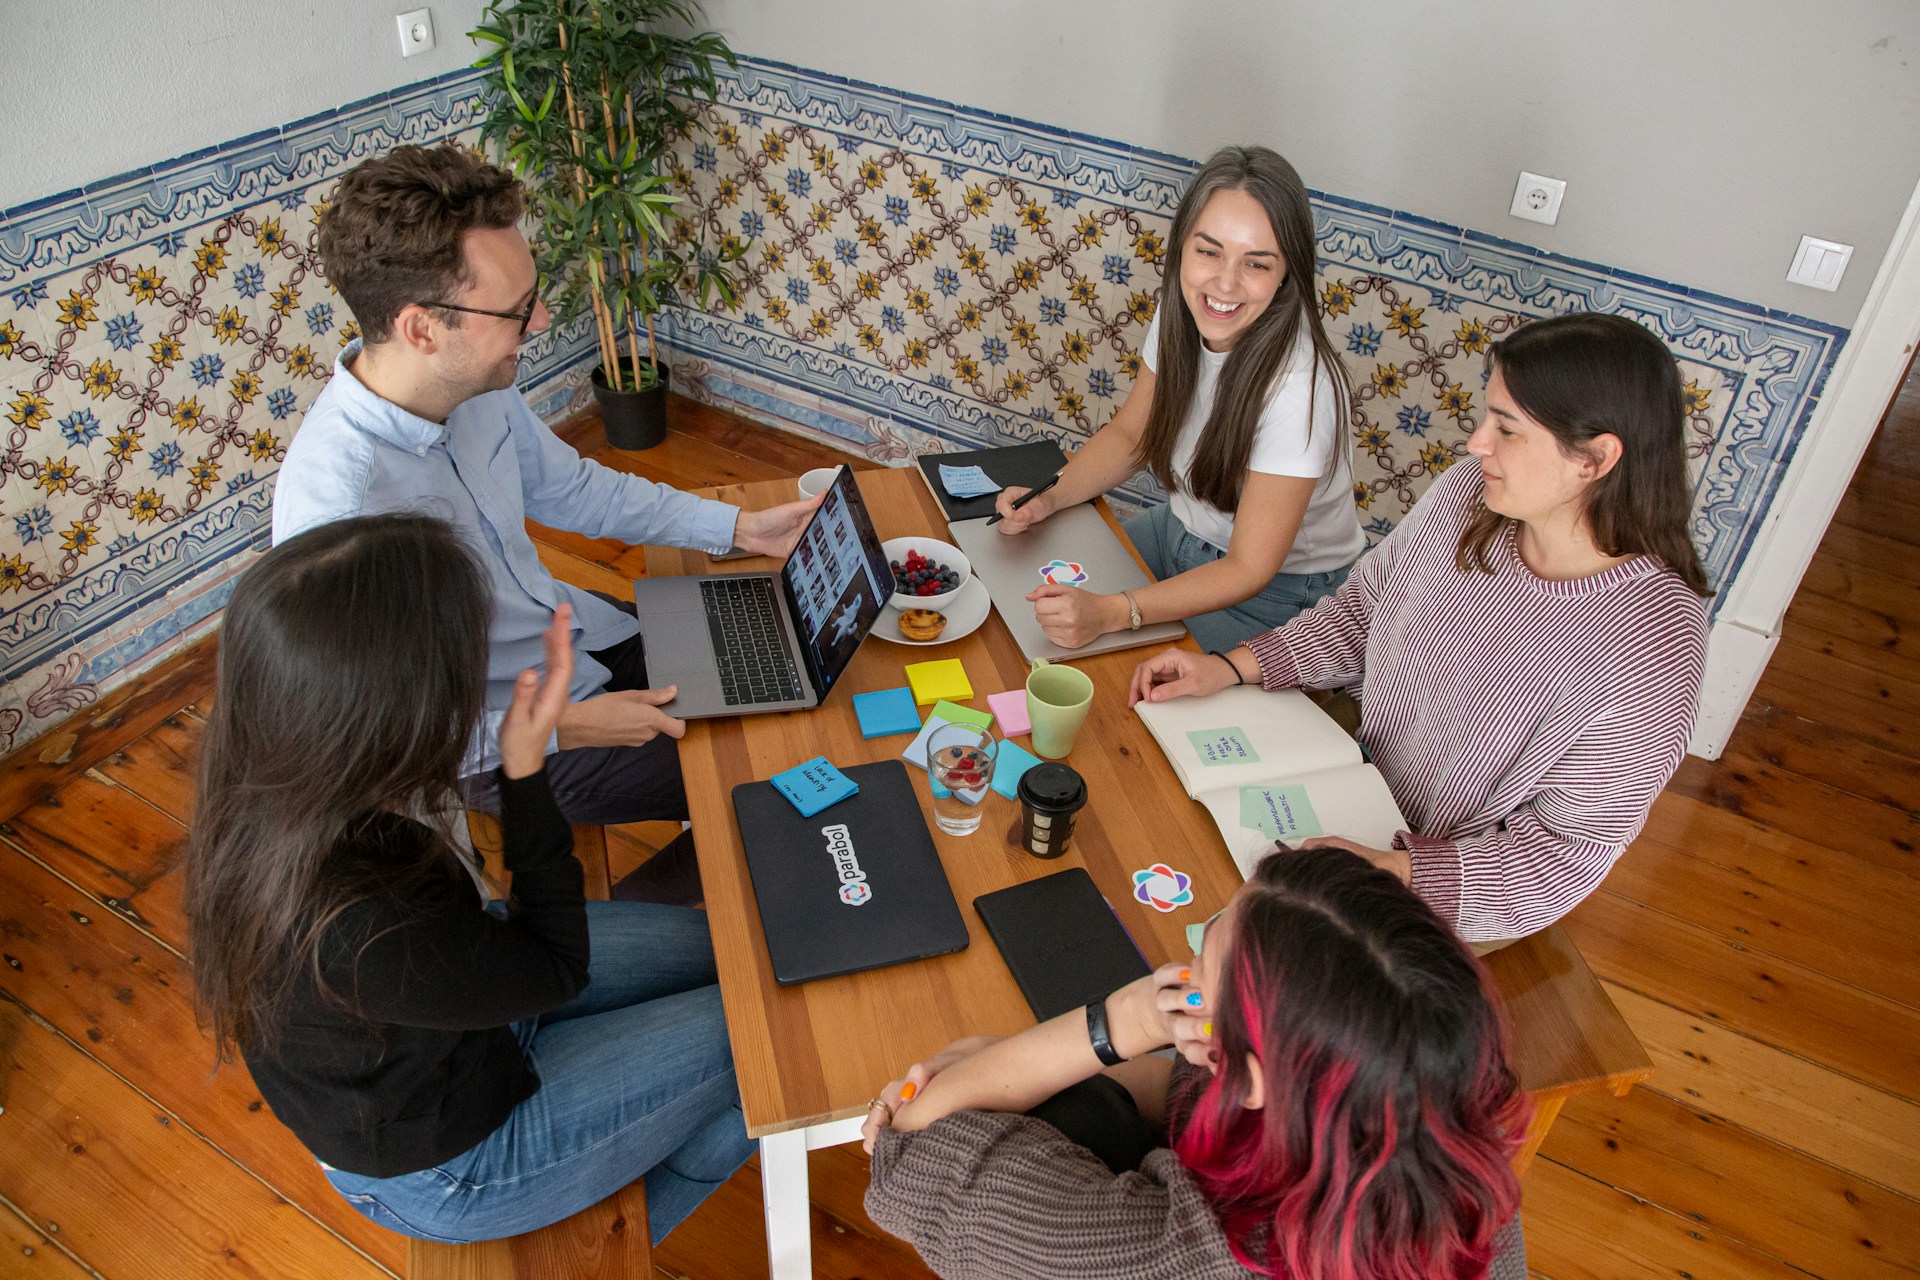 Image title: corporate events Image alt-title: A group of employees sitting around a wooden table. Image URL: https://unsplash.com/photos/a-group-of-people-sitting-around-a-wooden-table-e5ob6fBTi64 